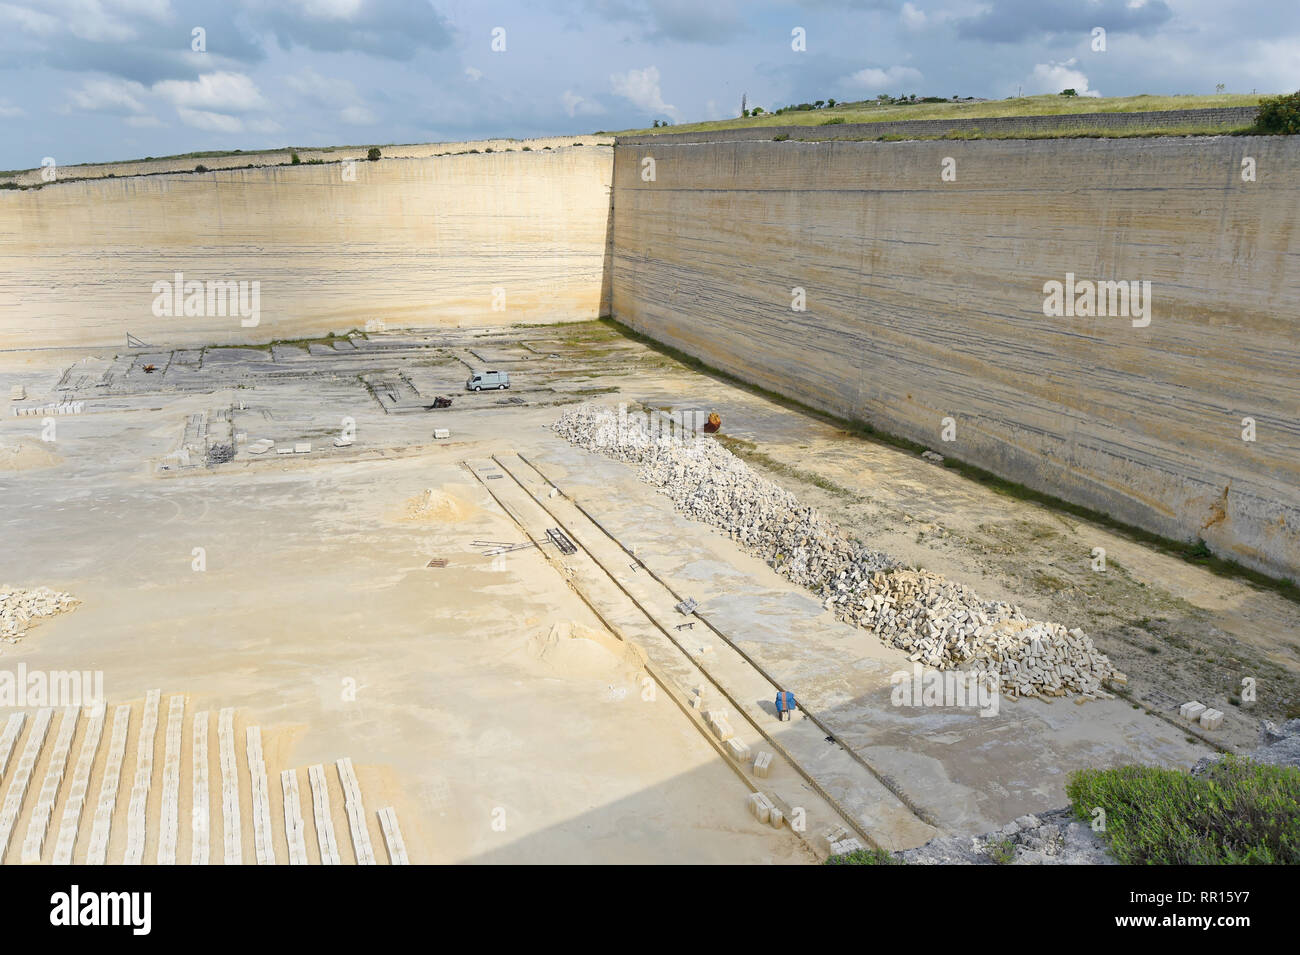 All images A sandstone quarry, old mine near Matera, Italy Stock Photo